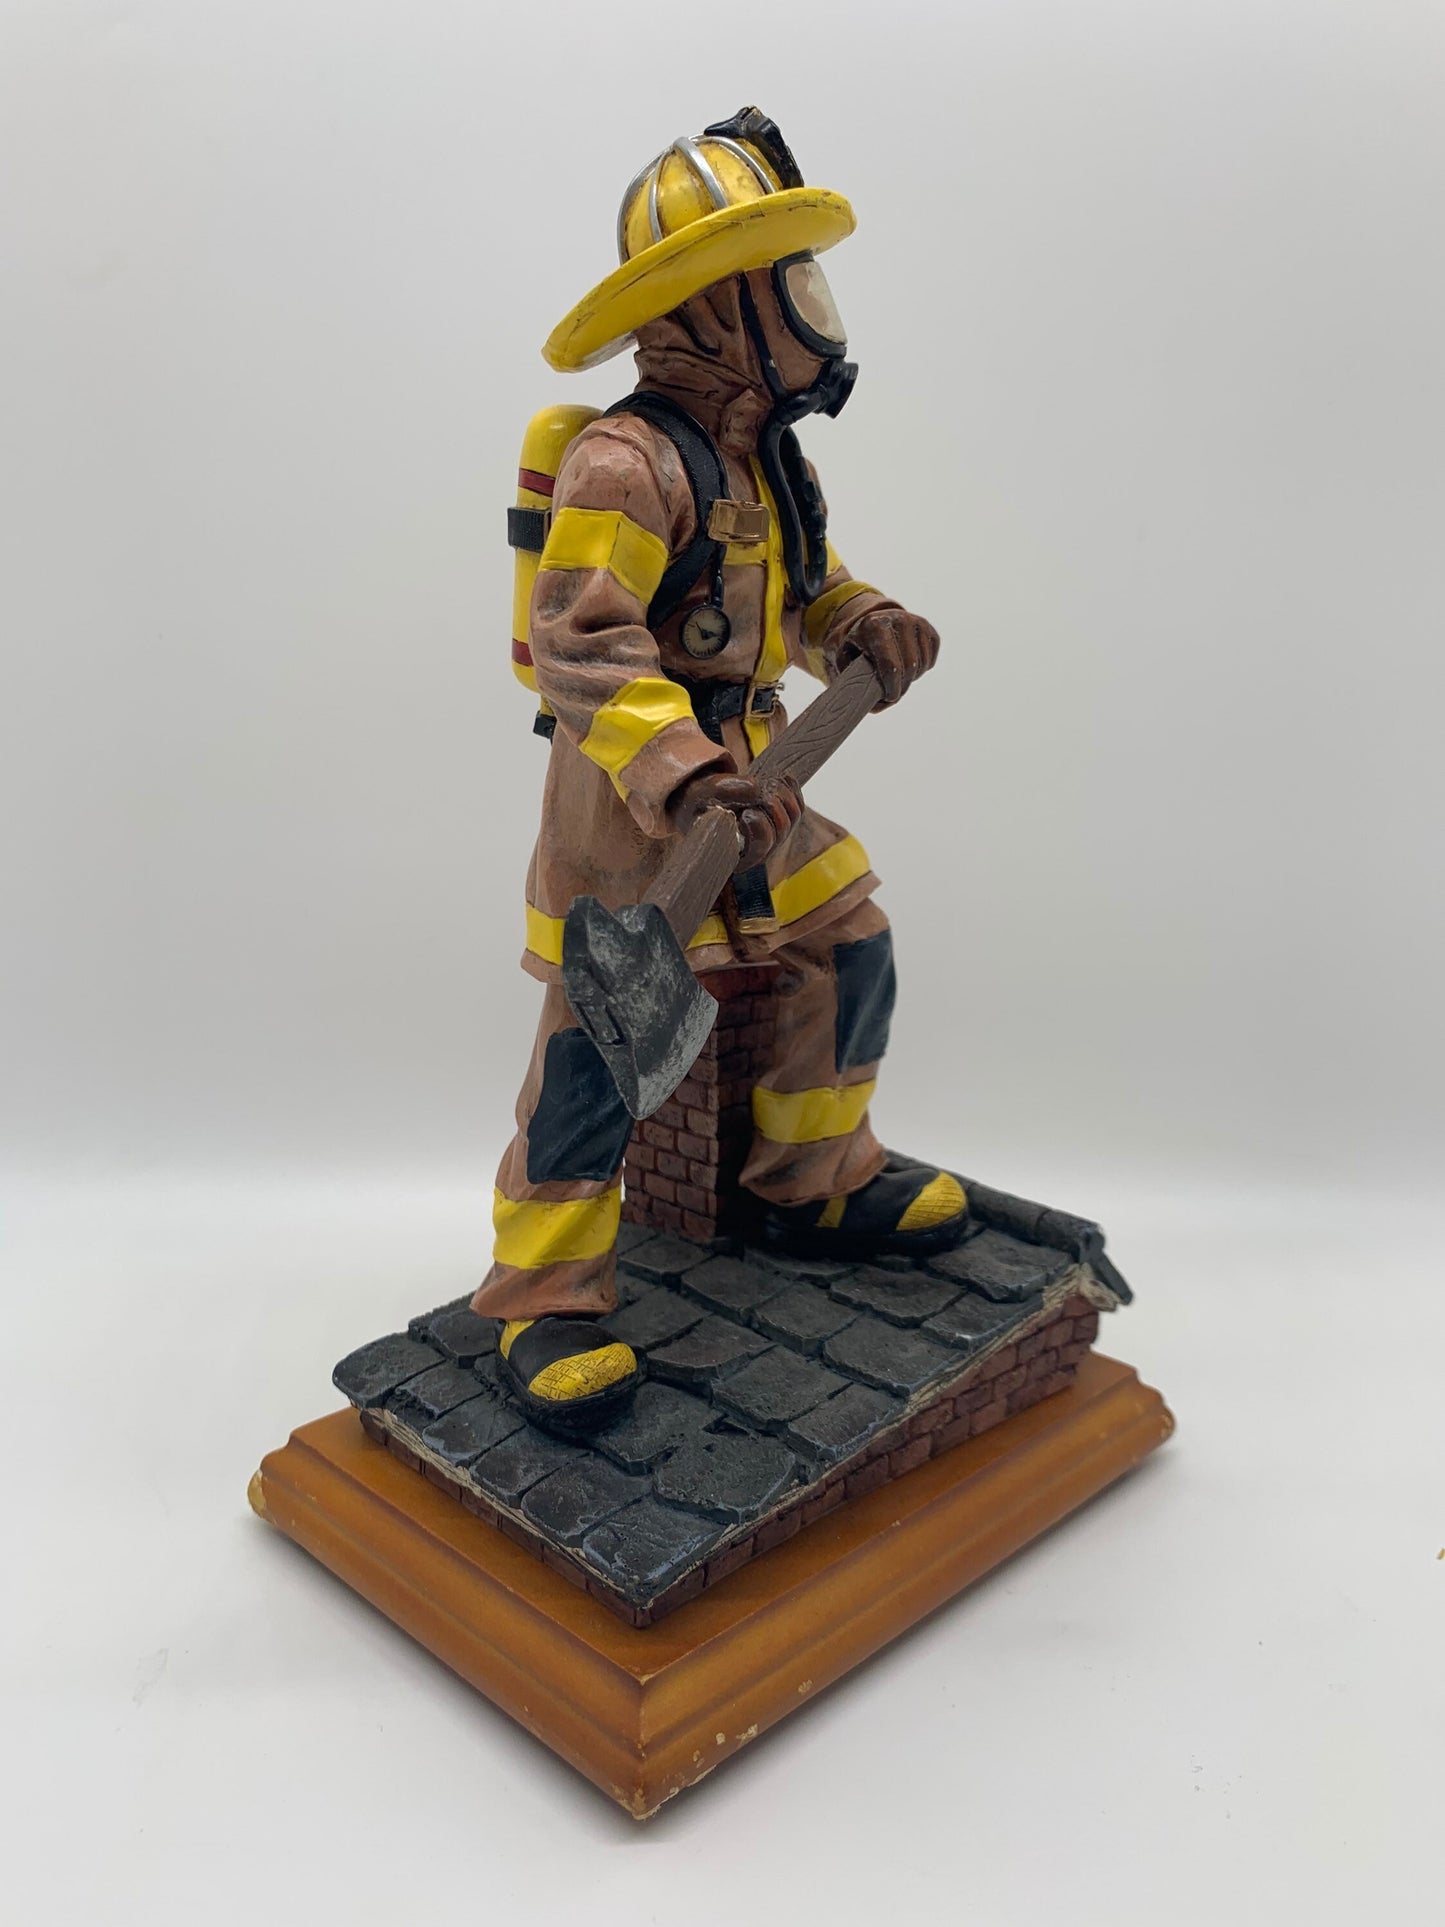 Firefighter on Rooftop Yellow Helmet Figurine Red Hats of Courage Vanmark Collectable Handcrafted Statue Perfect Birthday Gift